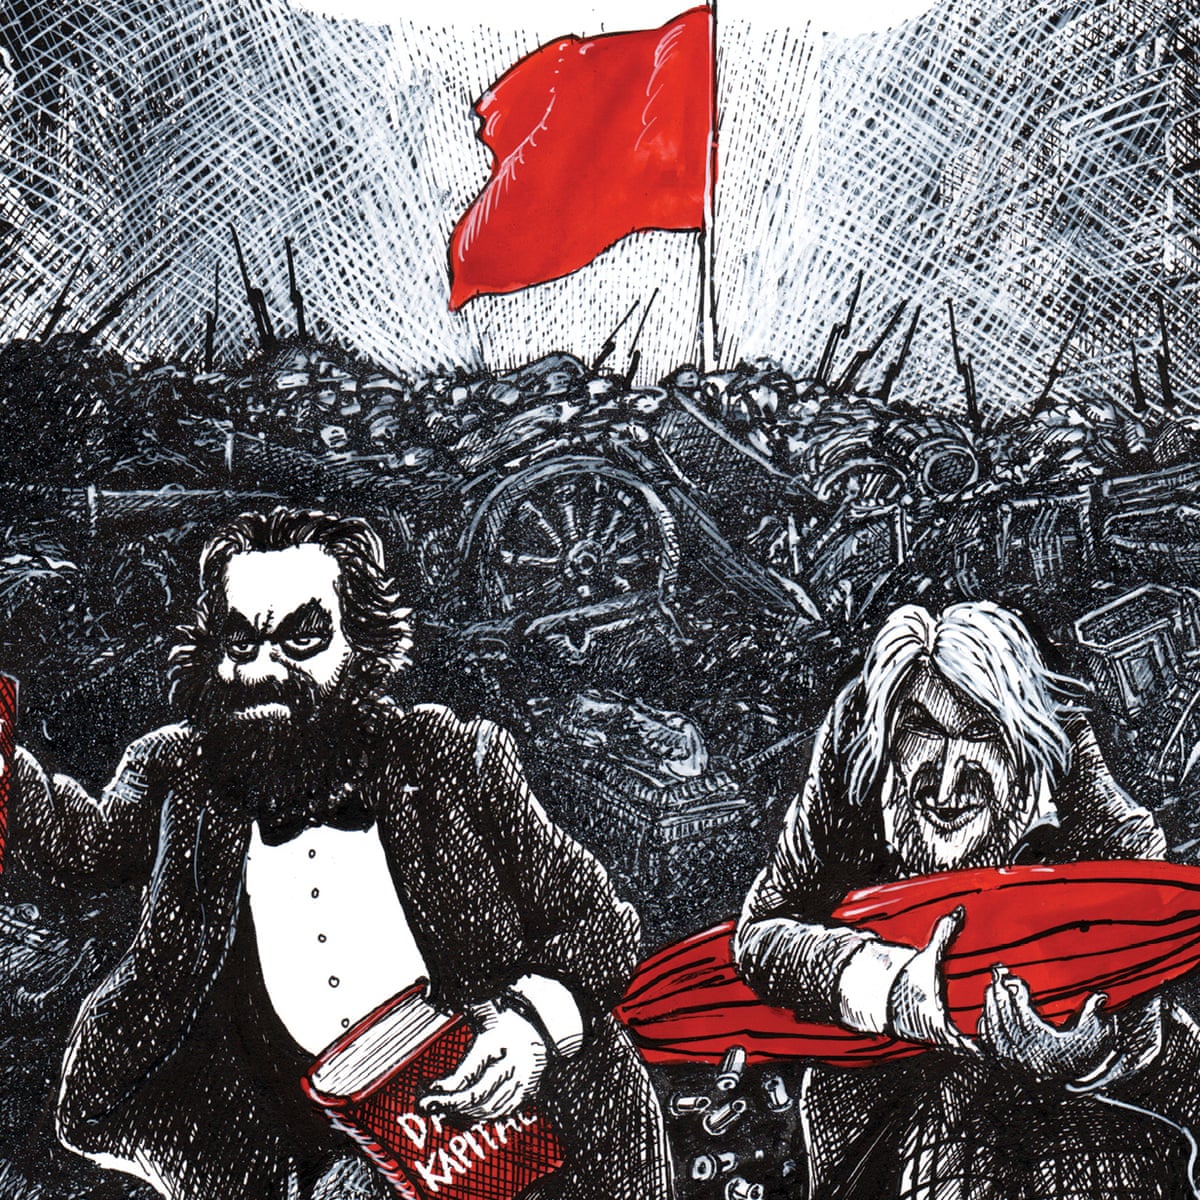 Filth, fury, gags and vendettas: The Communist Manifesto as a graphic novel  | Comics and graphic novels | The Guardian